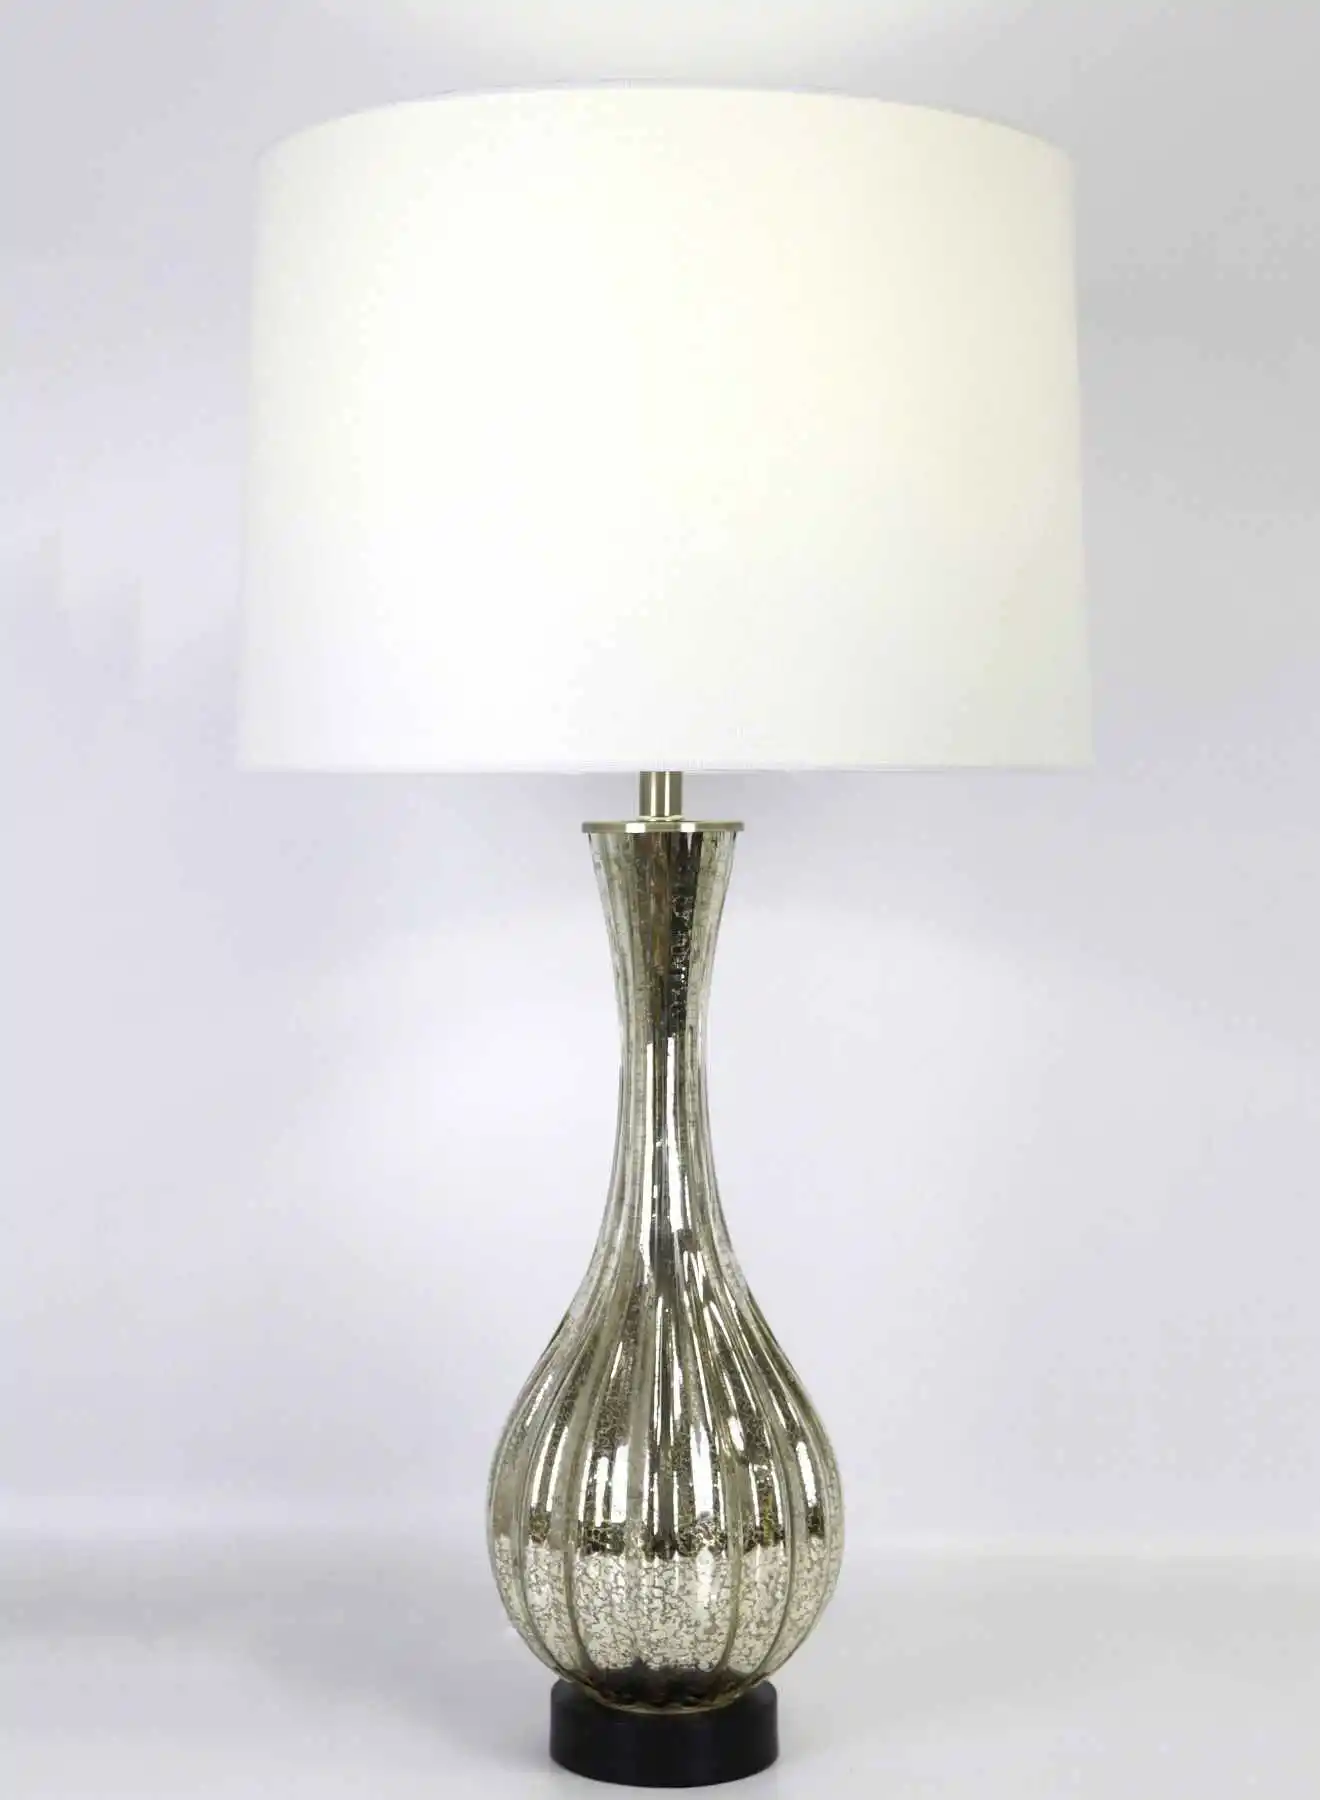 ebb & flow Modern Design Glass Table Lamp Unique Luxury Quality Material for the Perfect Stylish Home RSN71049 Silver 15 x 27.5